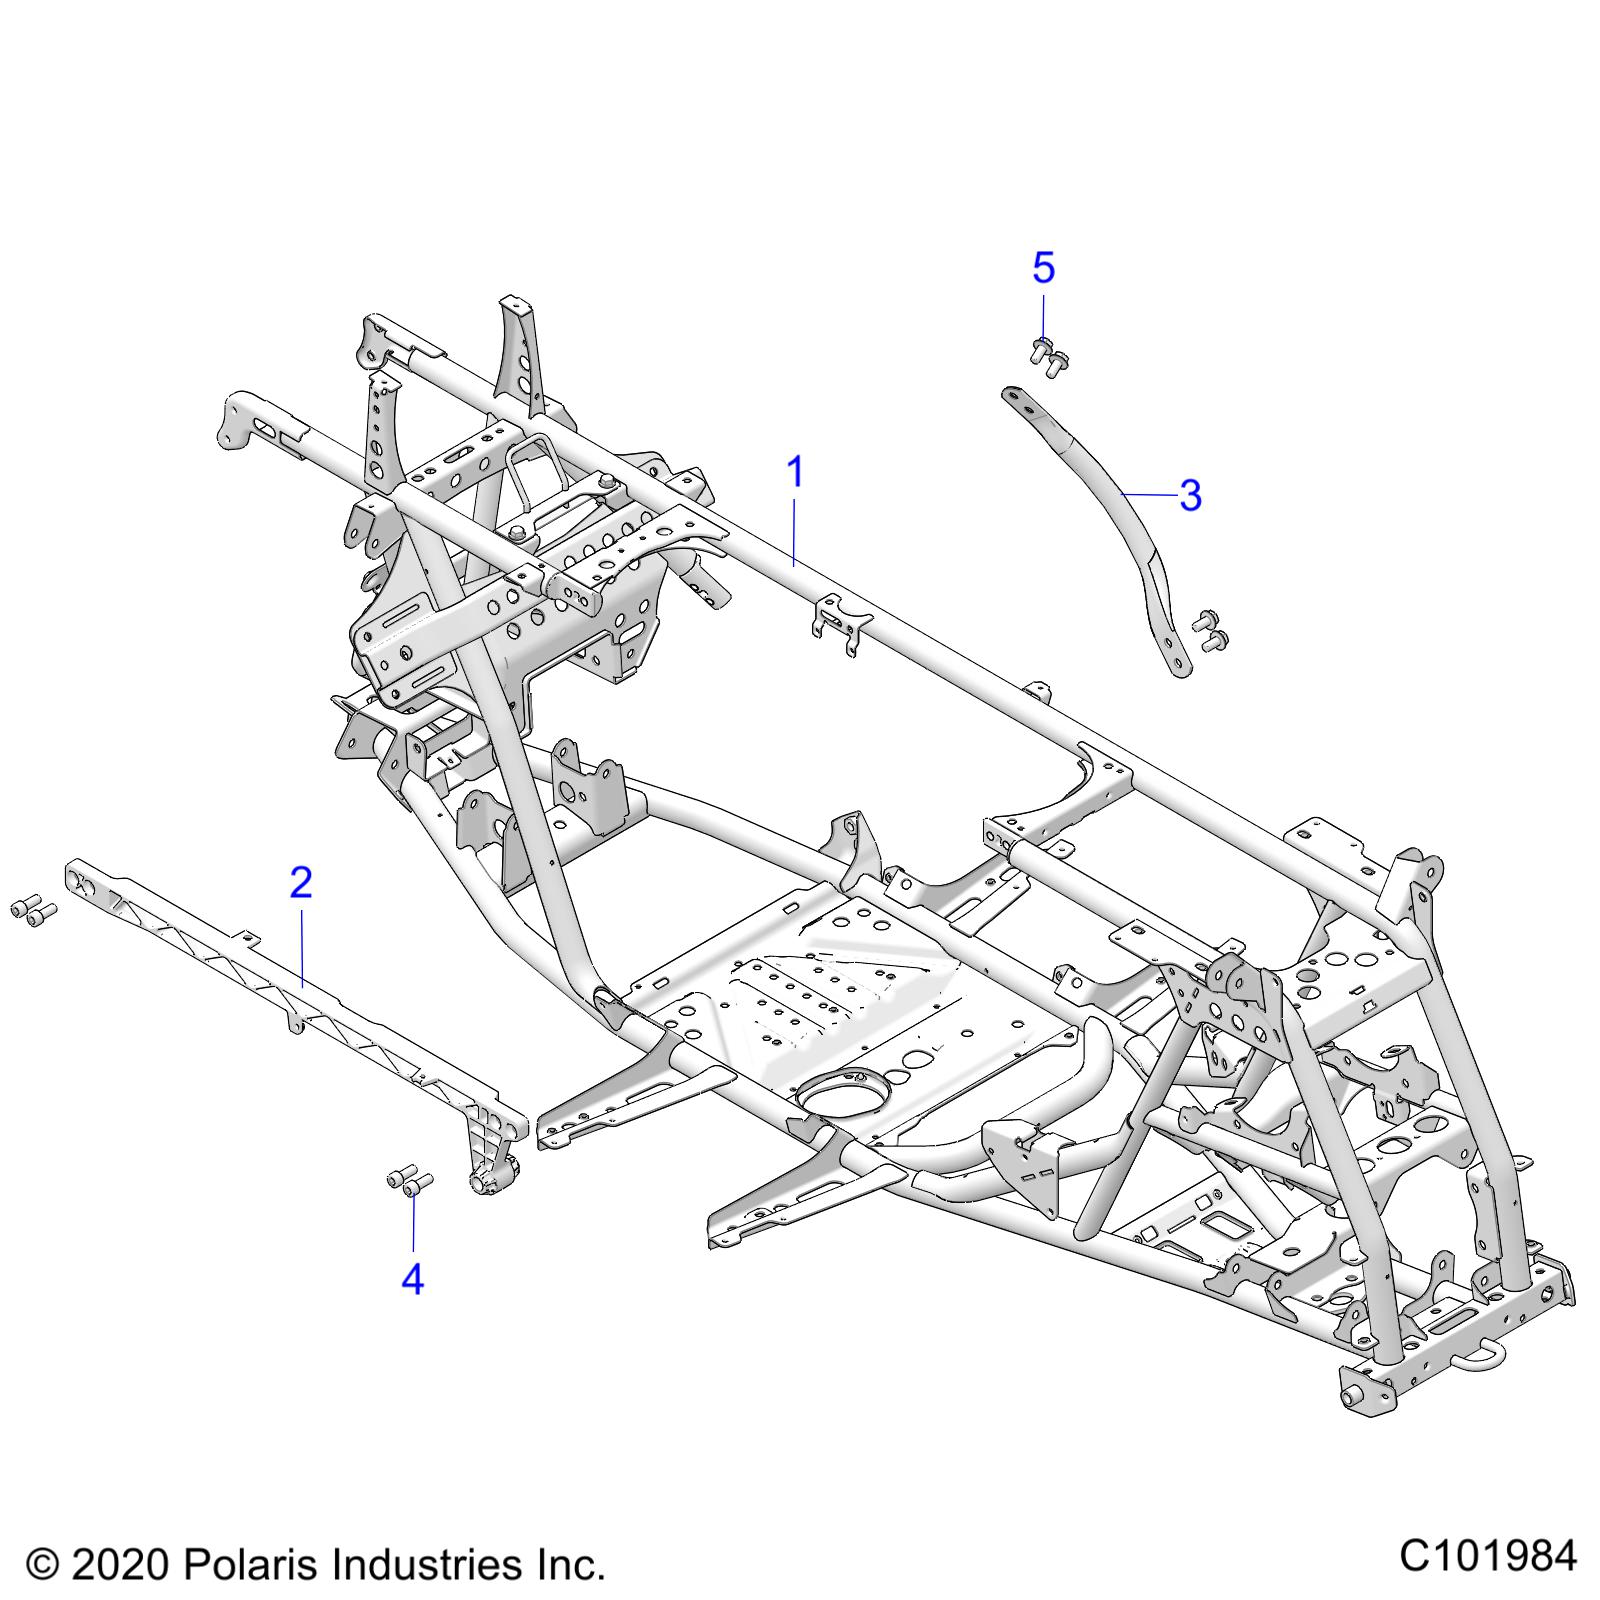 Part Number : 5135762-067 FRAME SUPPORT  UPPER  RIGHT  M